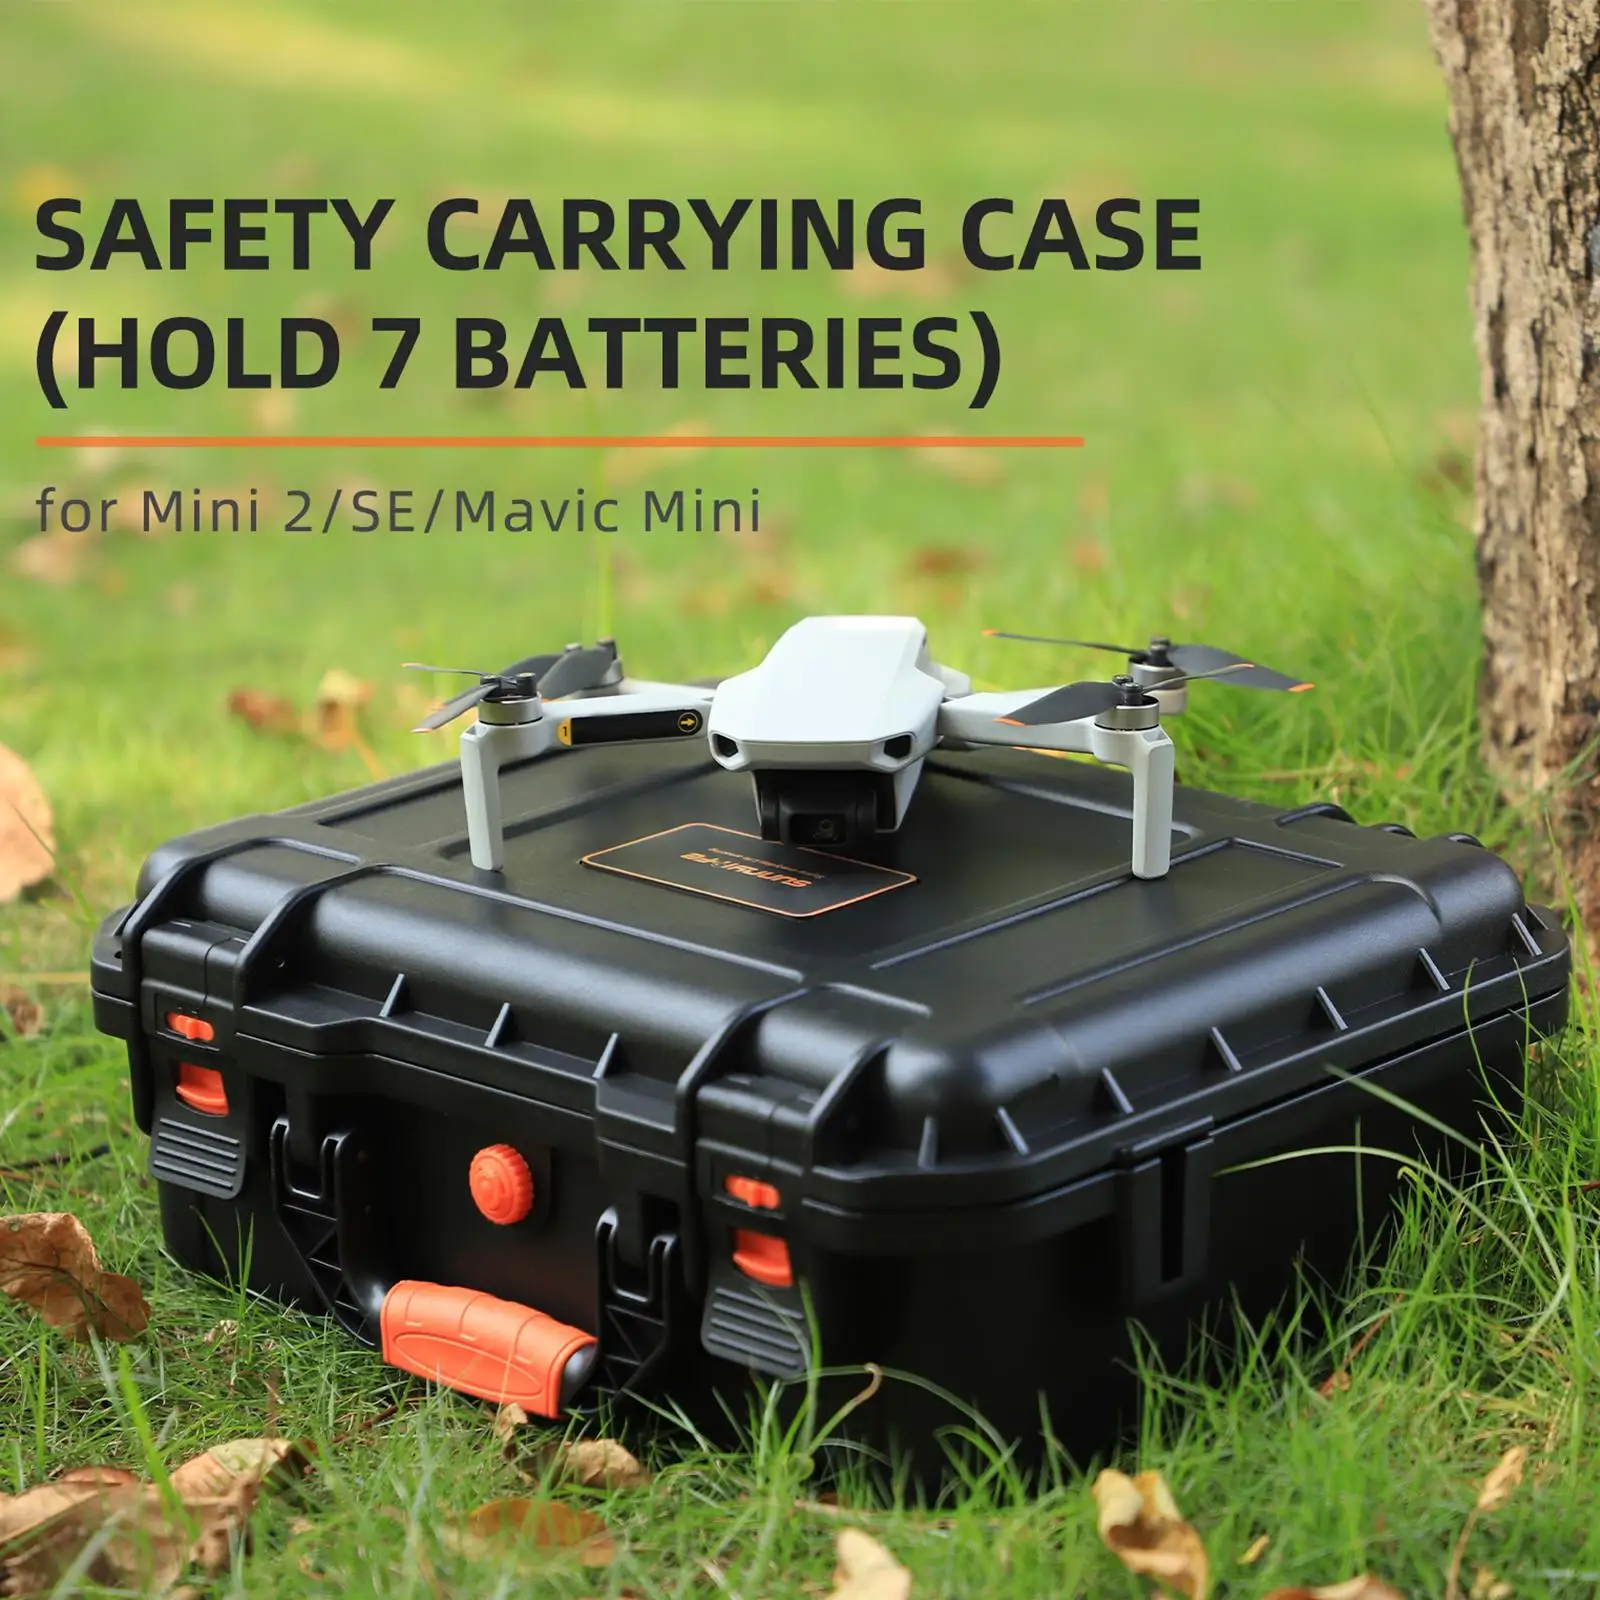 Portable Drone Carrying Case Storage Large Capacity Travel Case Storage Case Drone Carrying Handbag for Drone